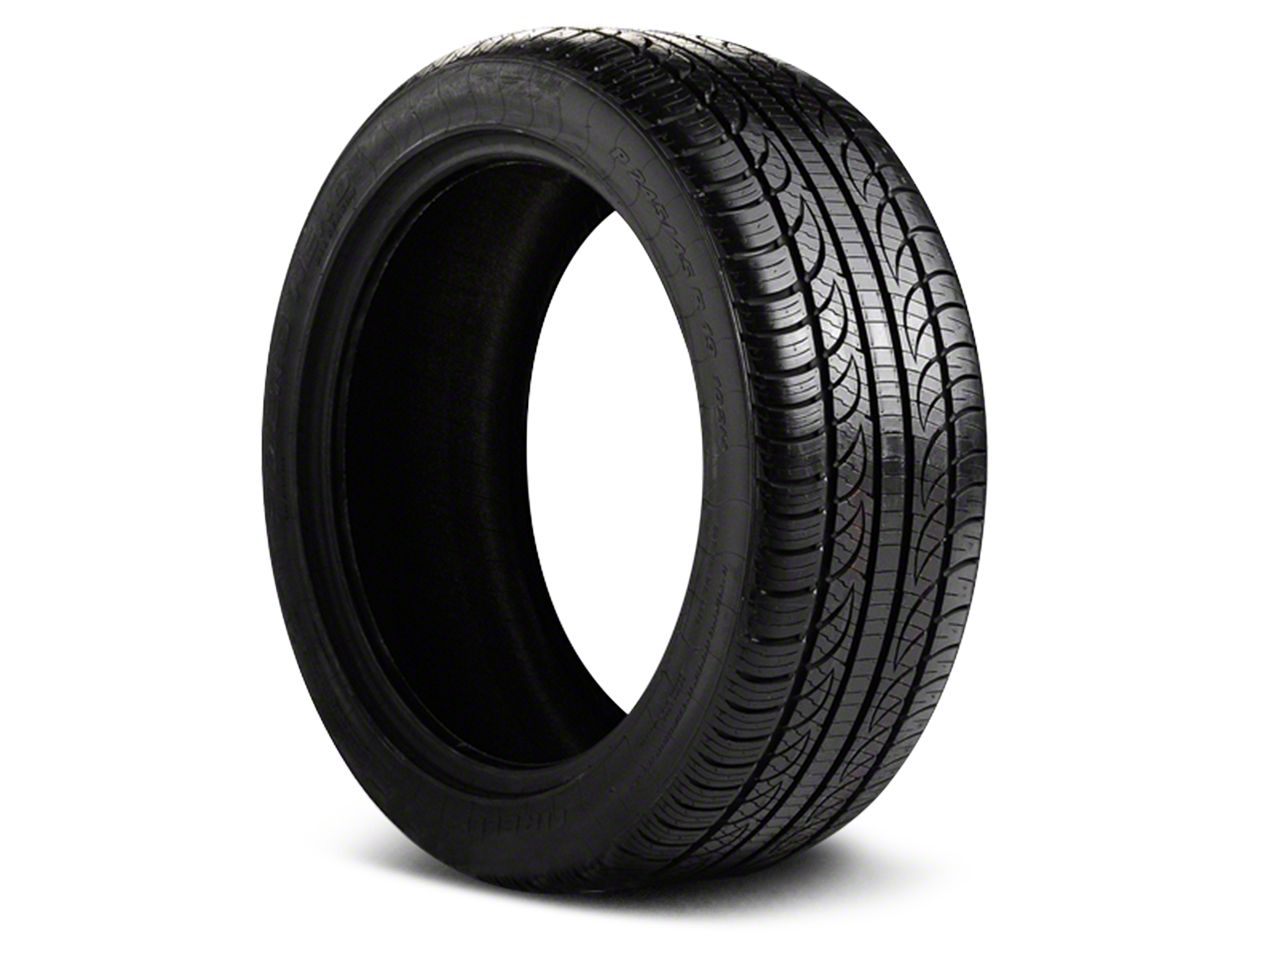 Mustang All Season Ford Tires 2005-2009